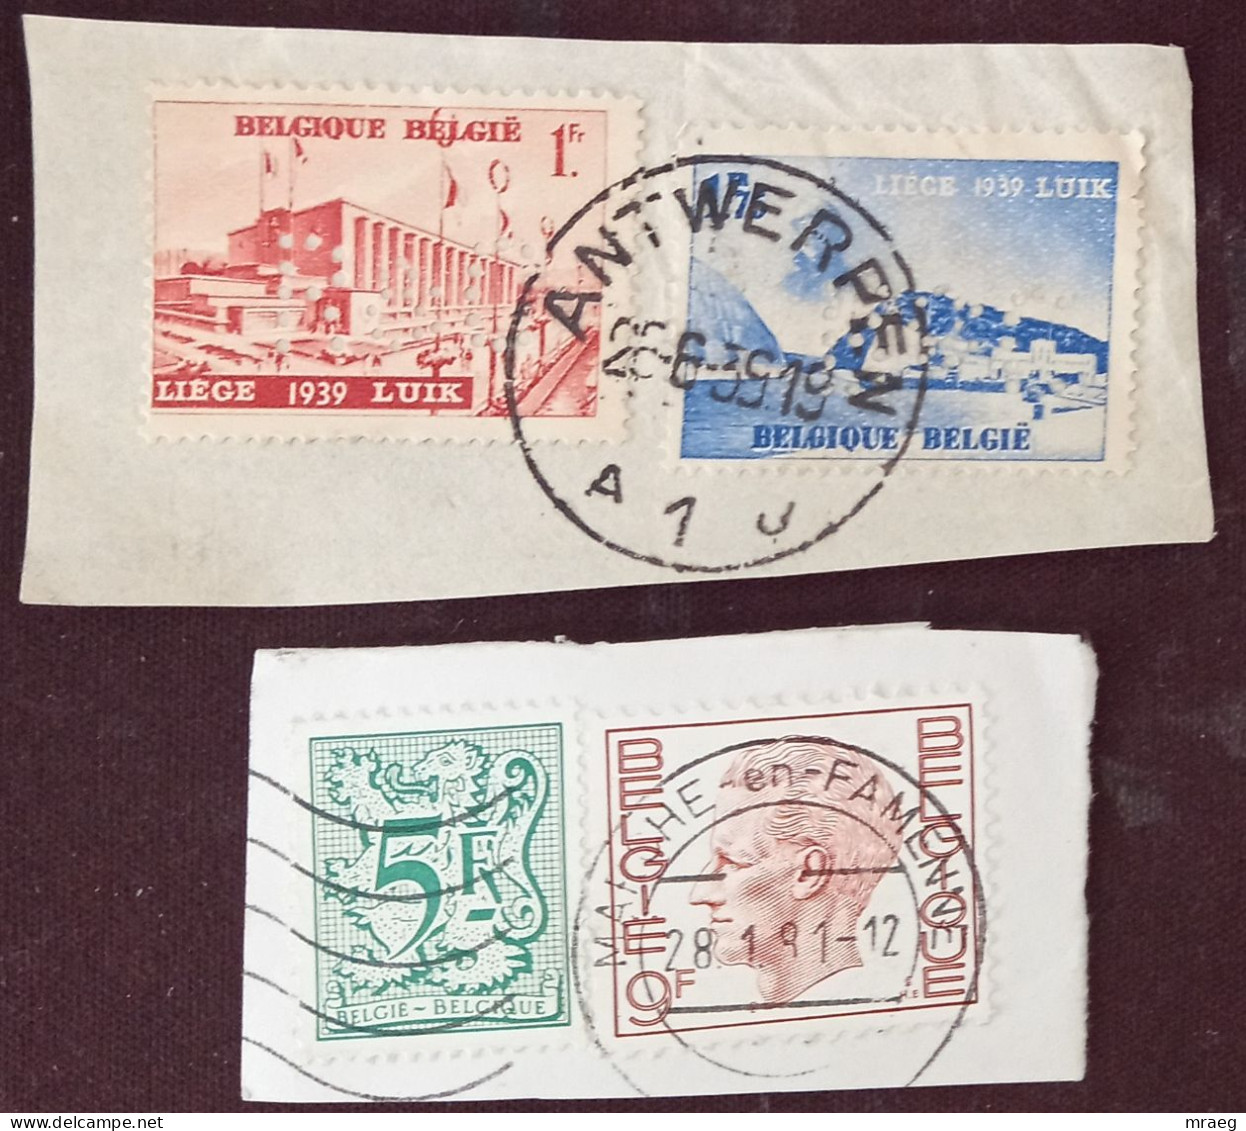 BELGIUM  1939 & 1981 TWO FRAGMENTS   F VF - Lettres & Documents